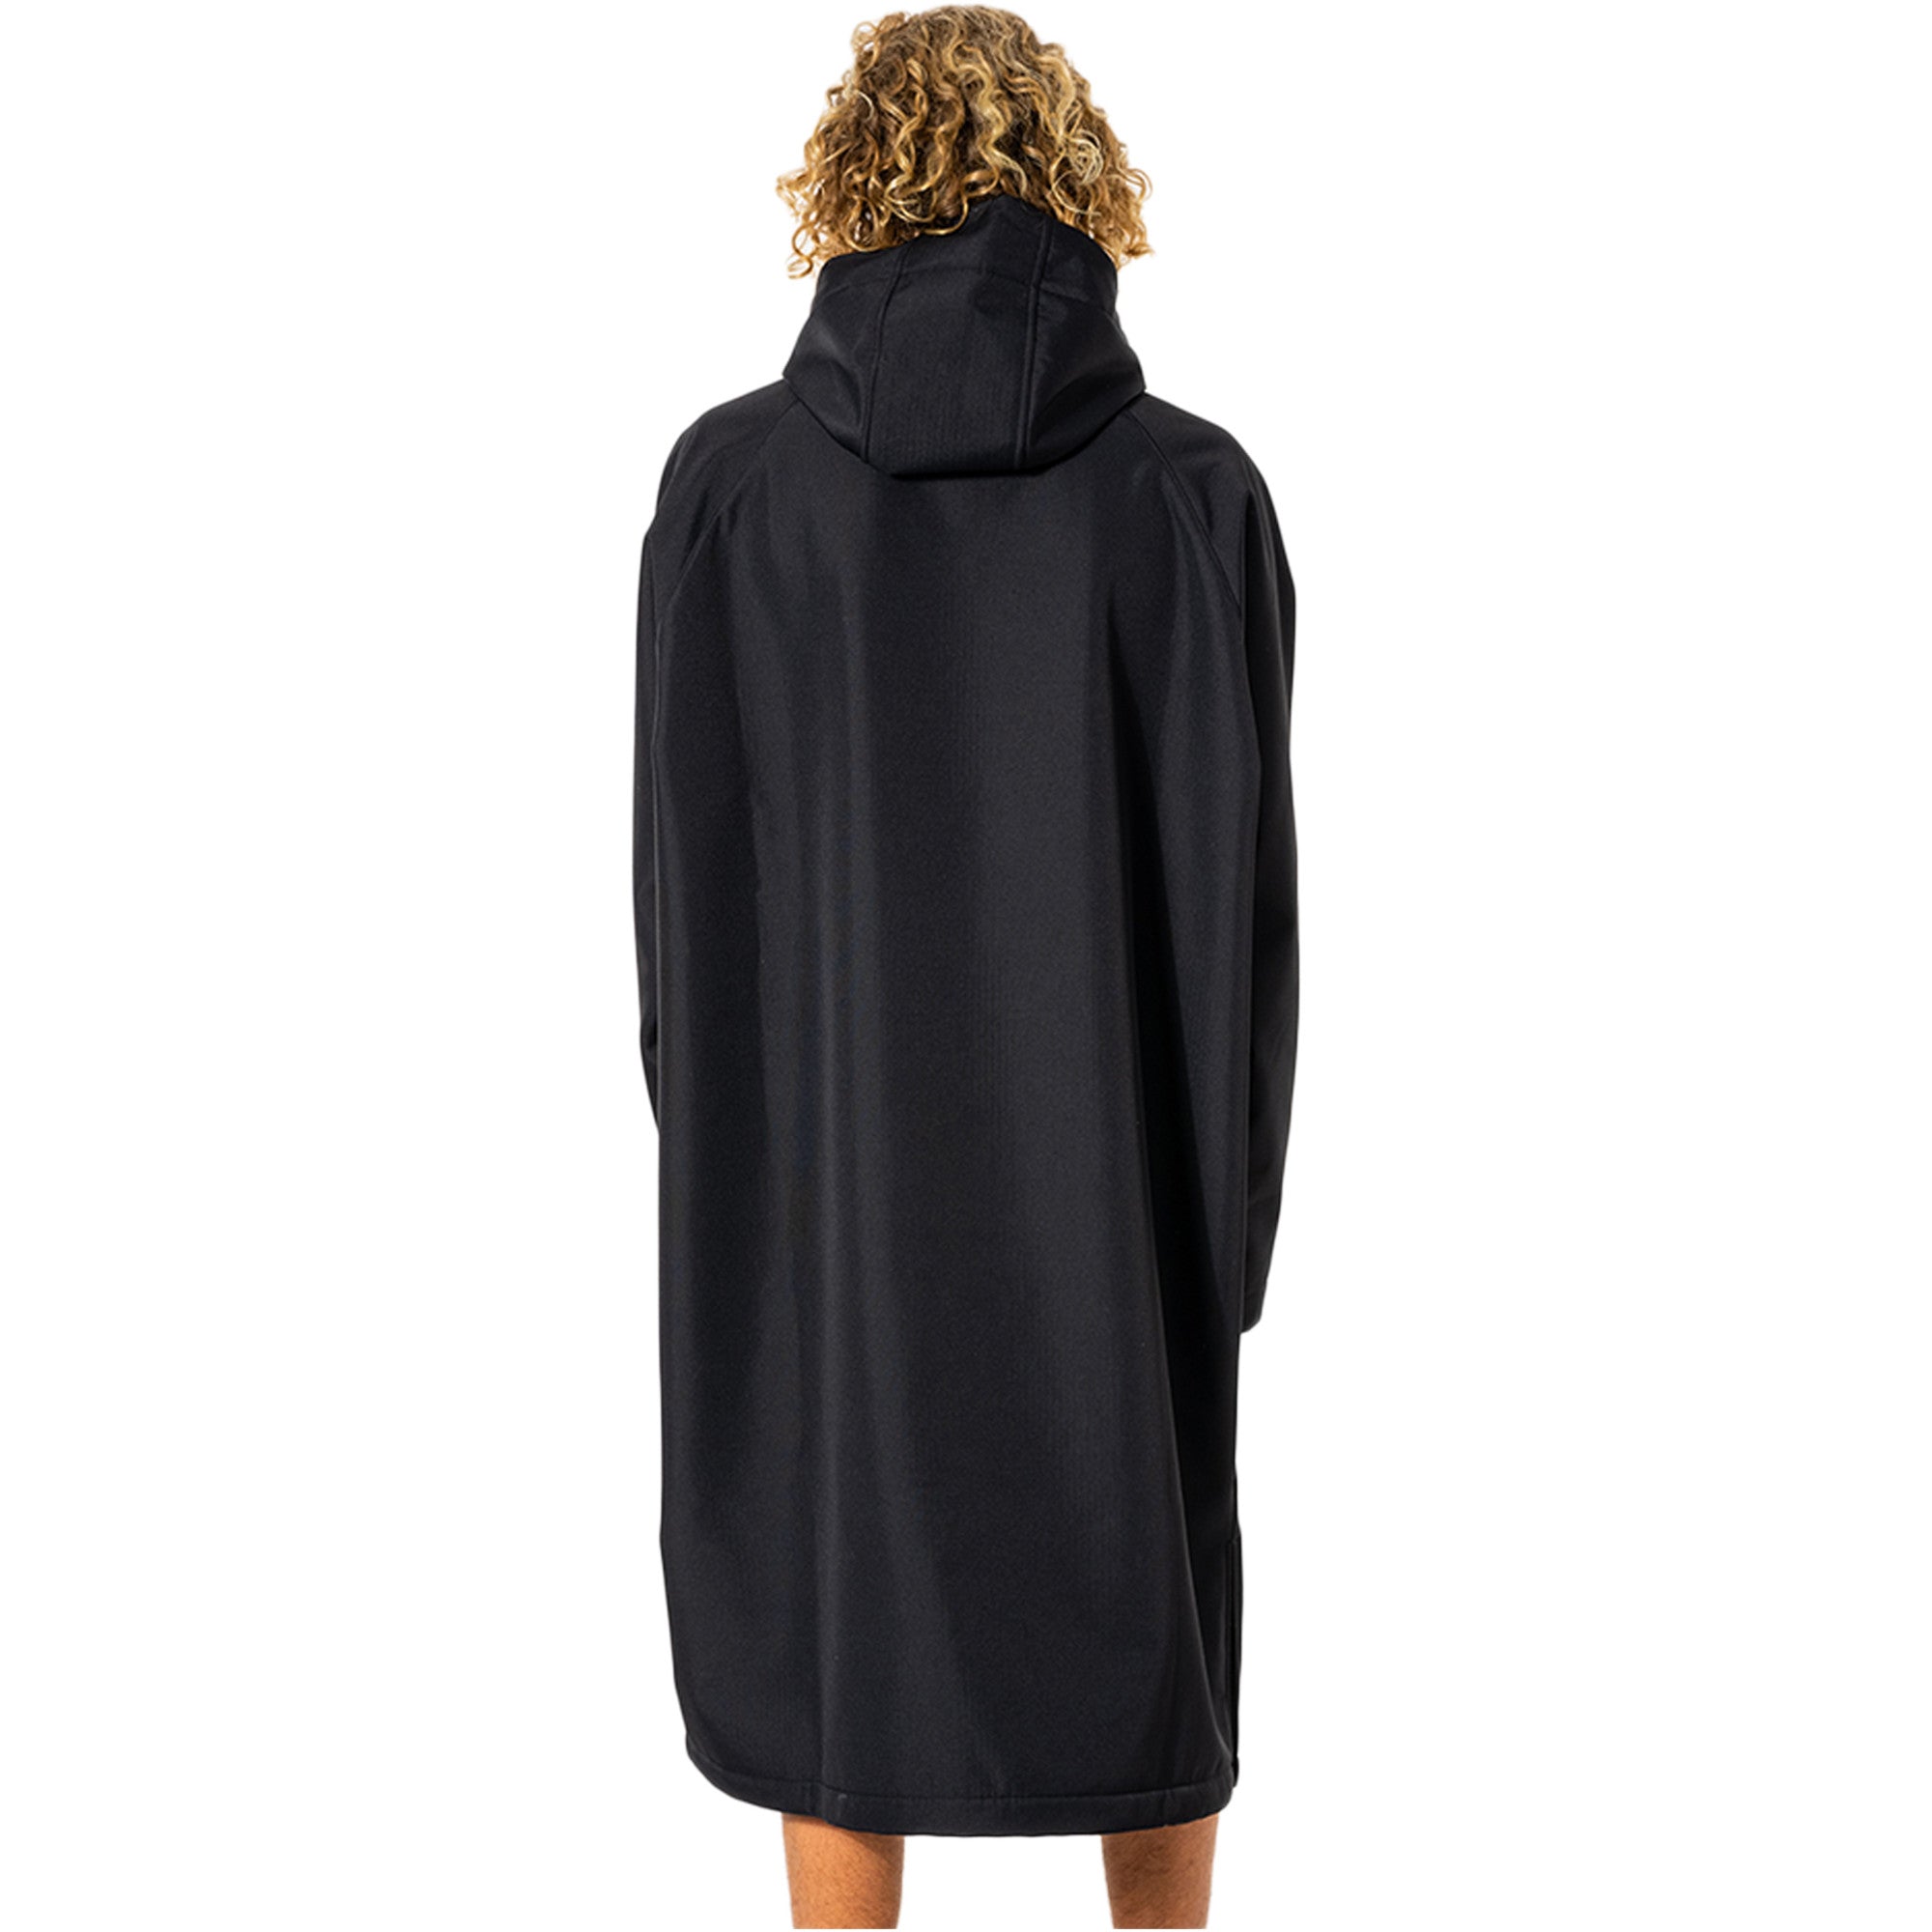 Rip Curl Anti Series Hooded Changing Robe